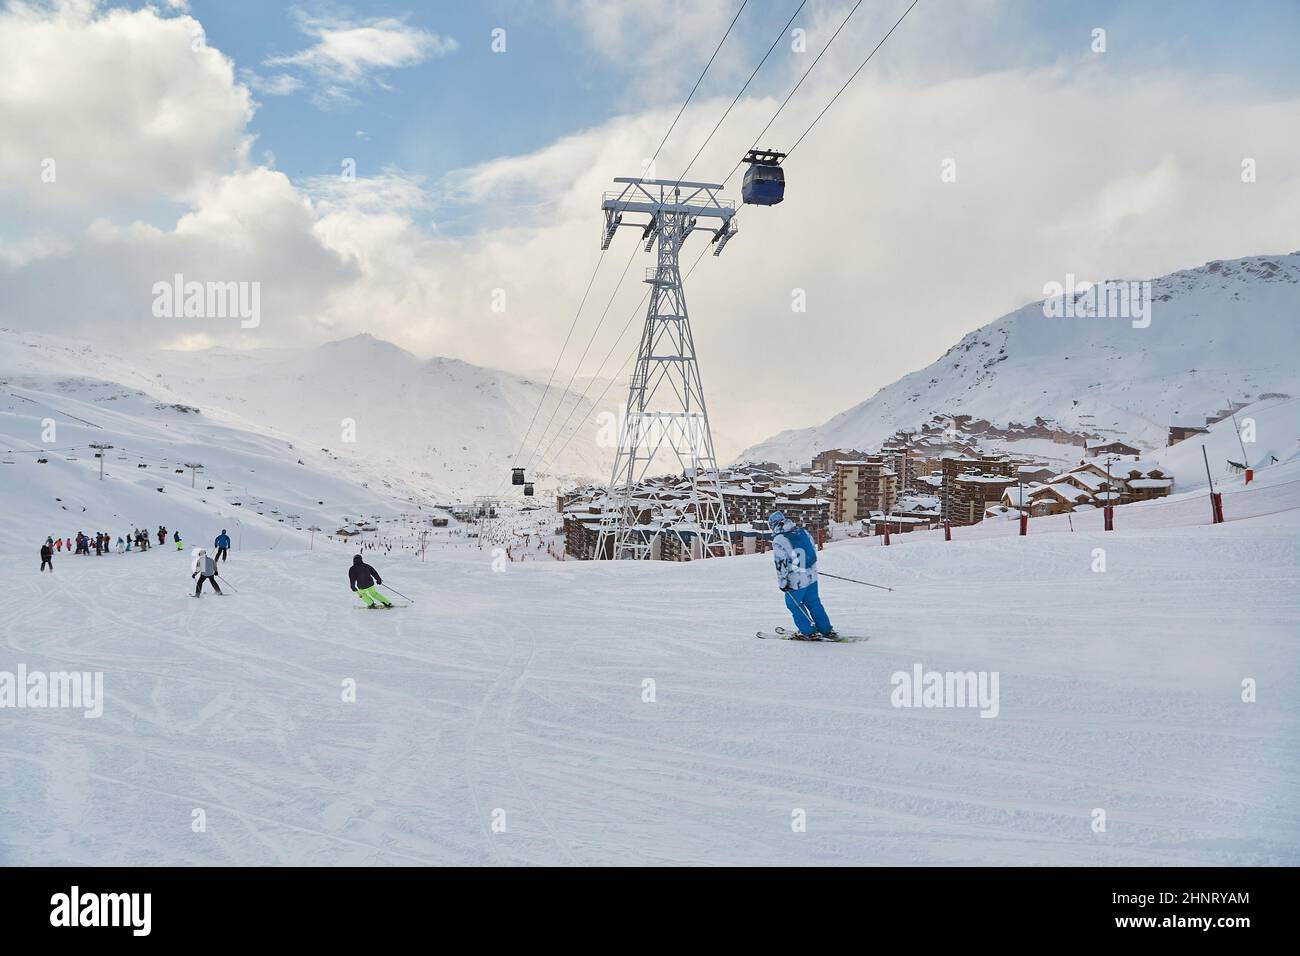 Skiing slopes, with many people Stock Photo